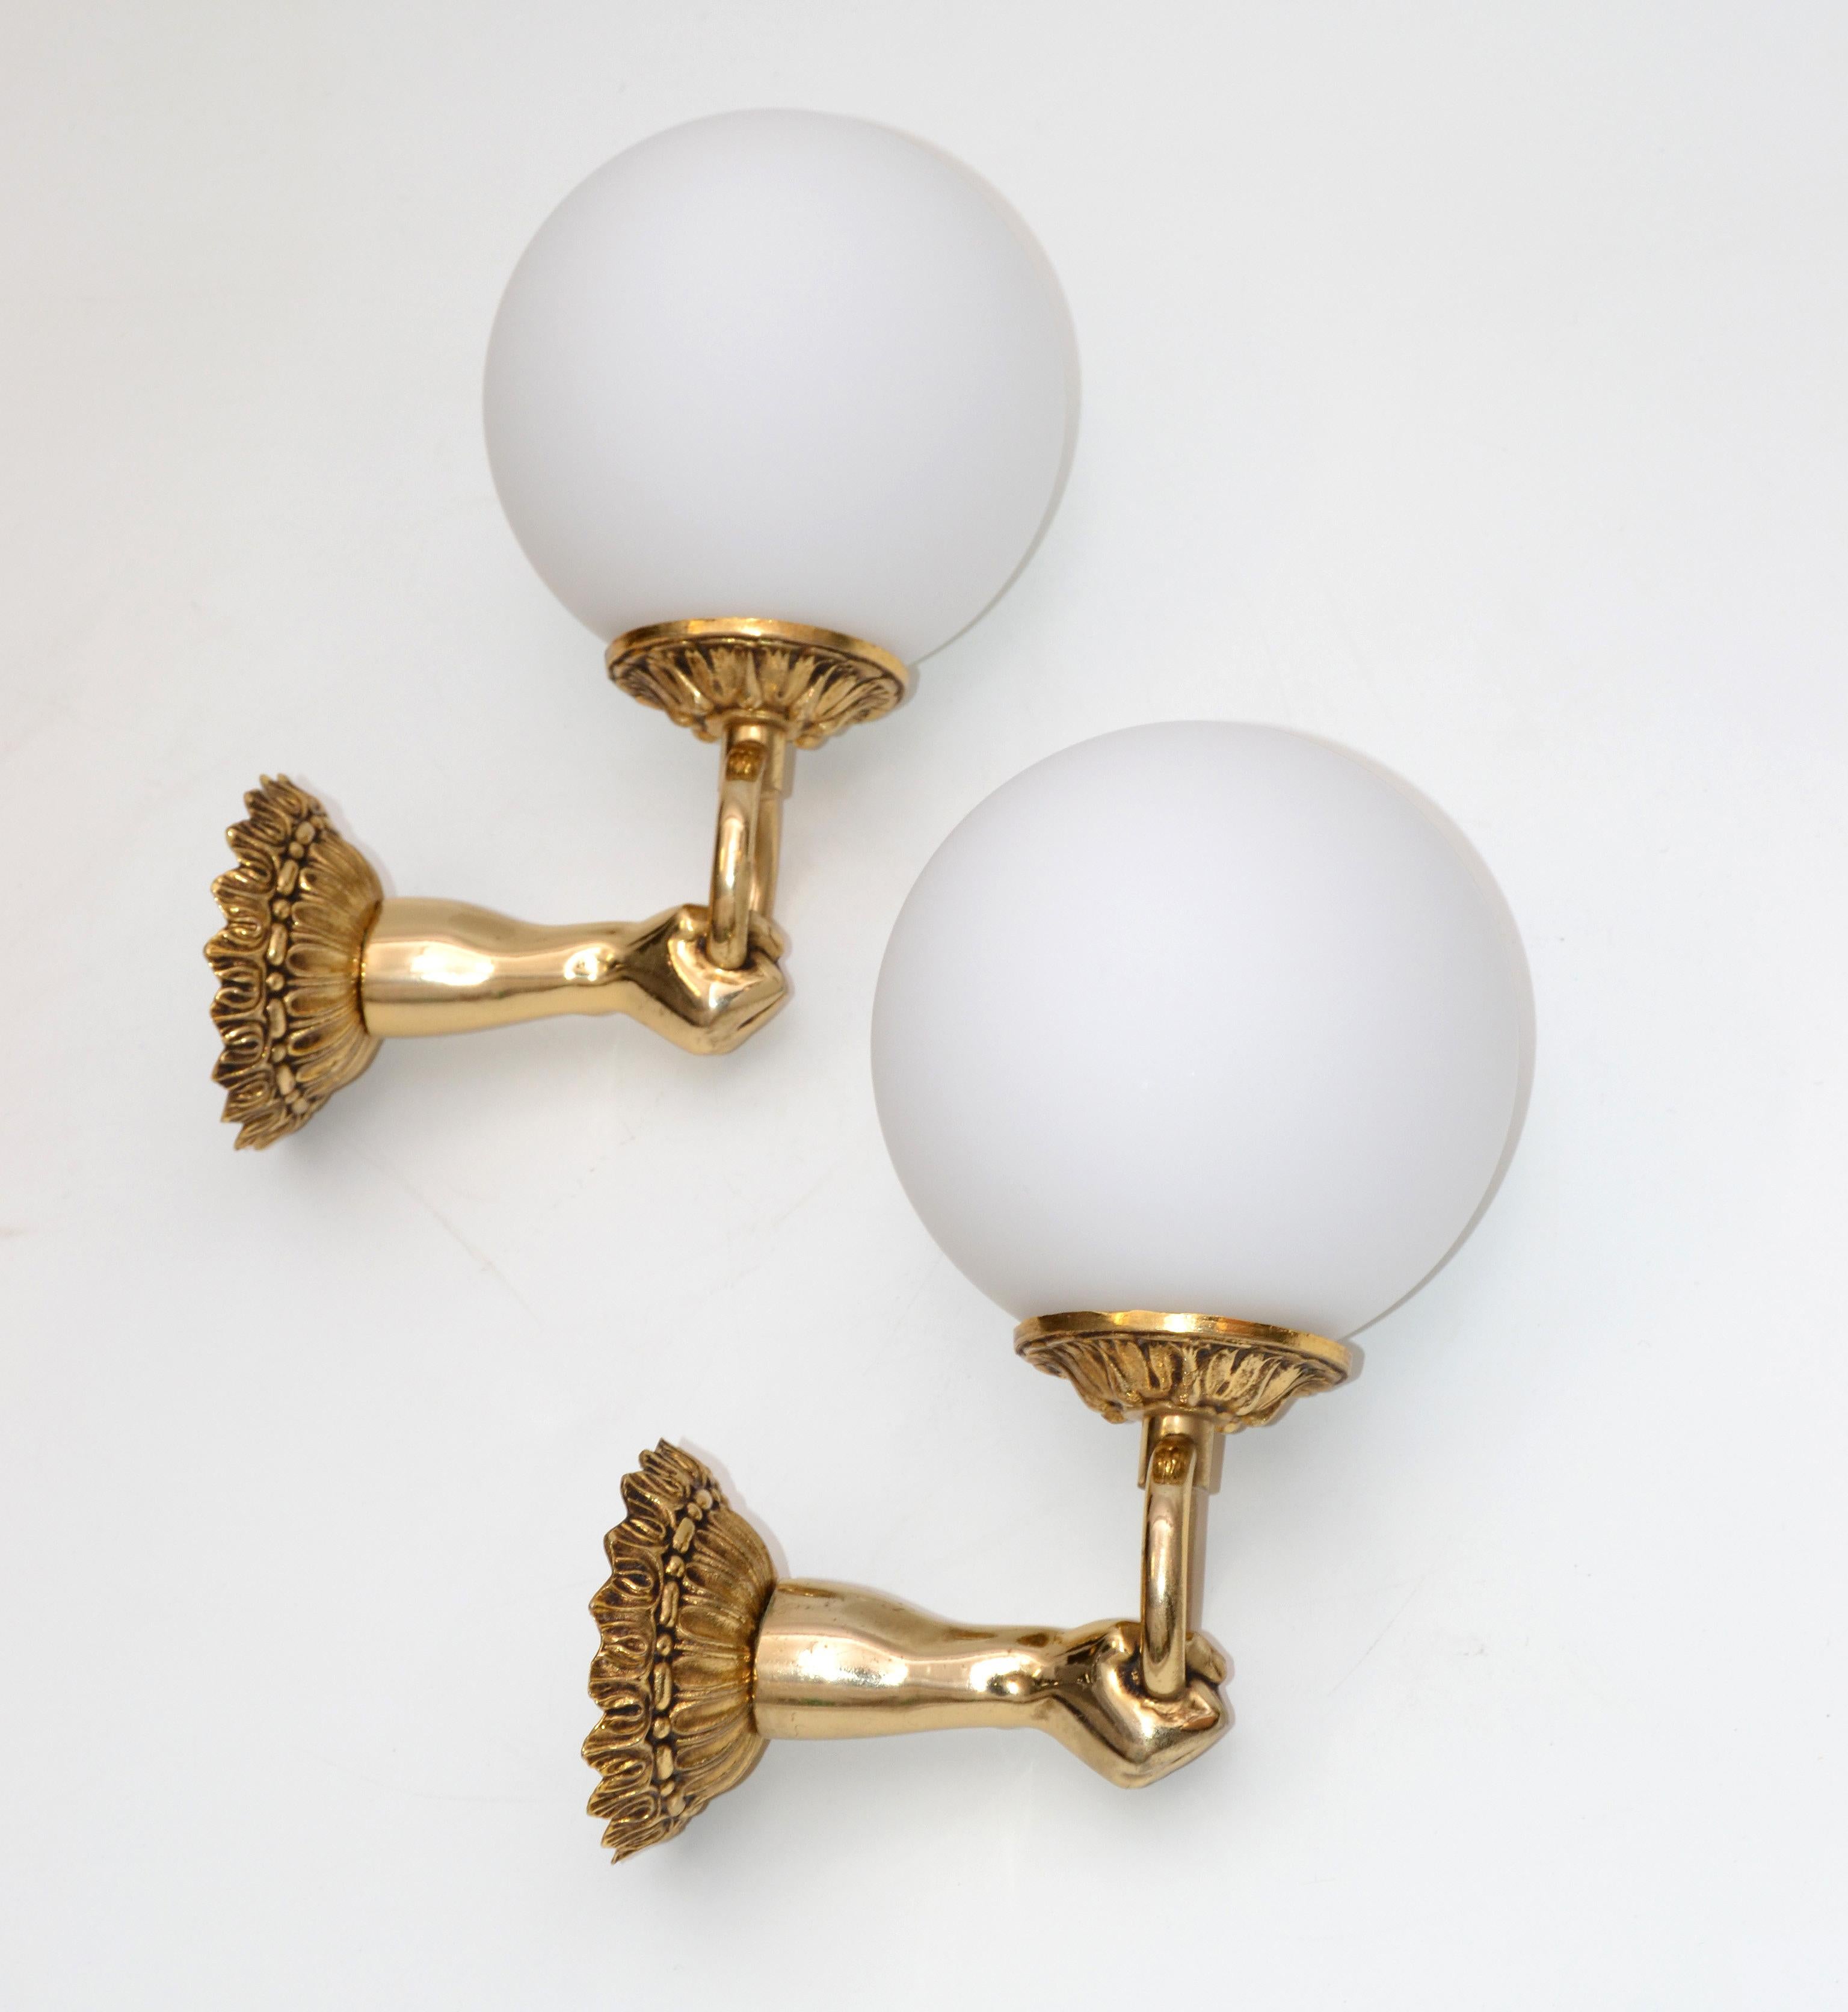 Pair of French neoclassical wall sconces figuring a hand holding a globe.
3 pair available.
Each takes one light bulb with max. 60 watts.
US wired and in working condition.
Back plate measures 3.25 inches in diameter.
Please have a look on our